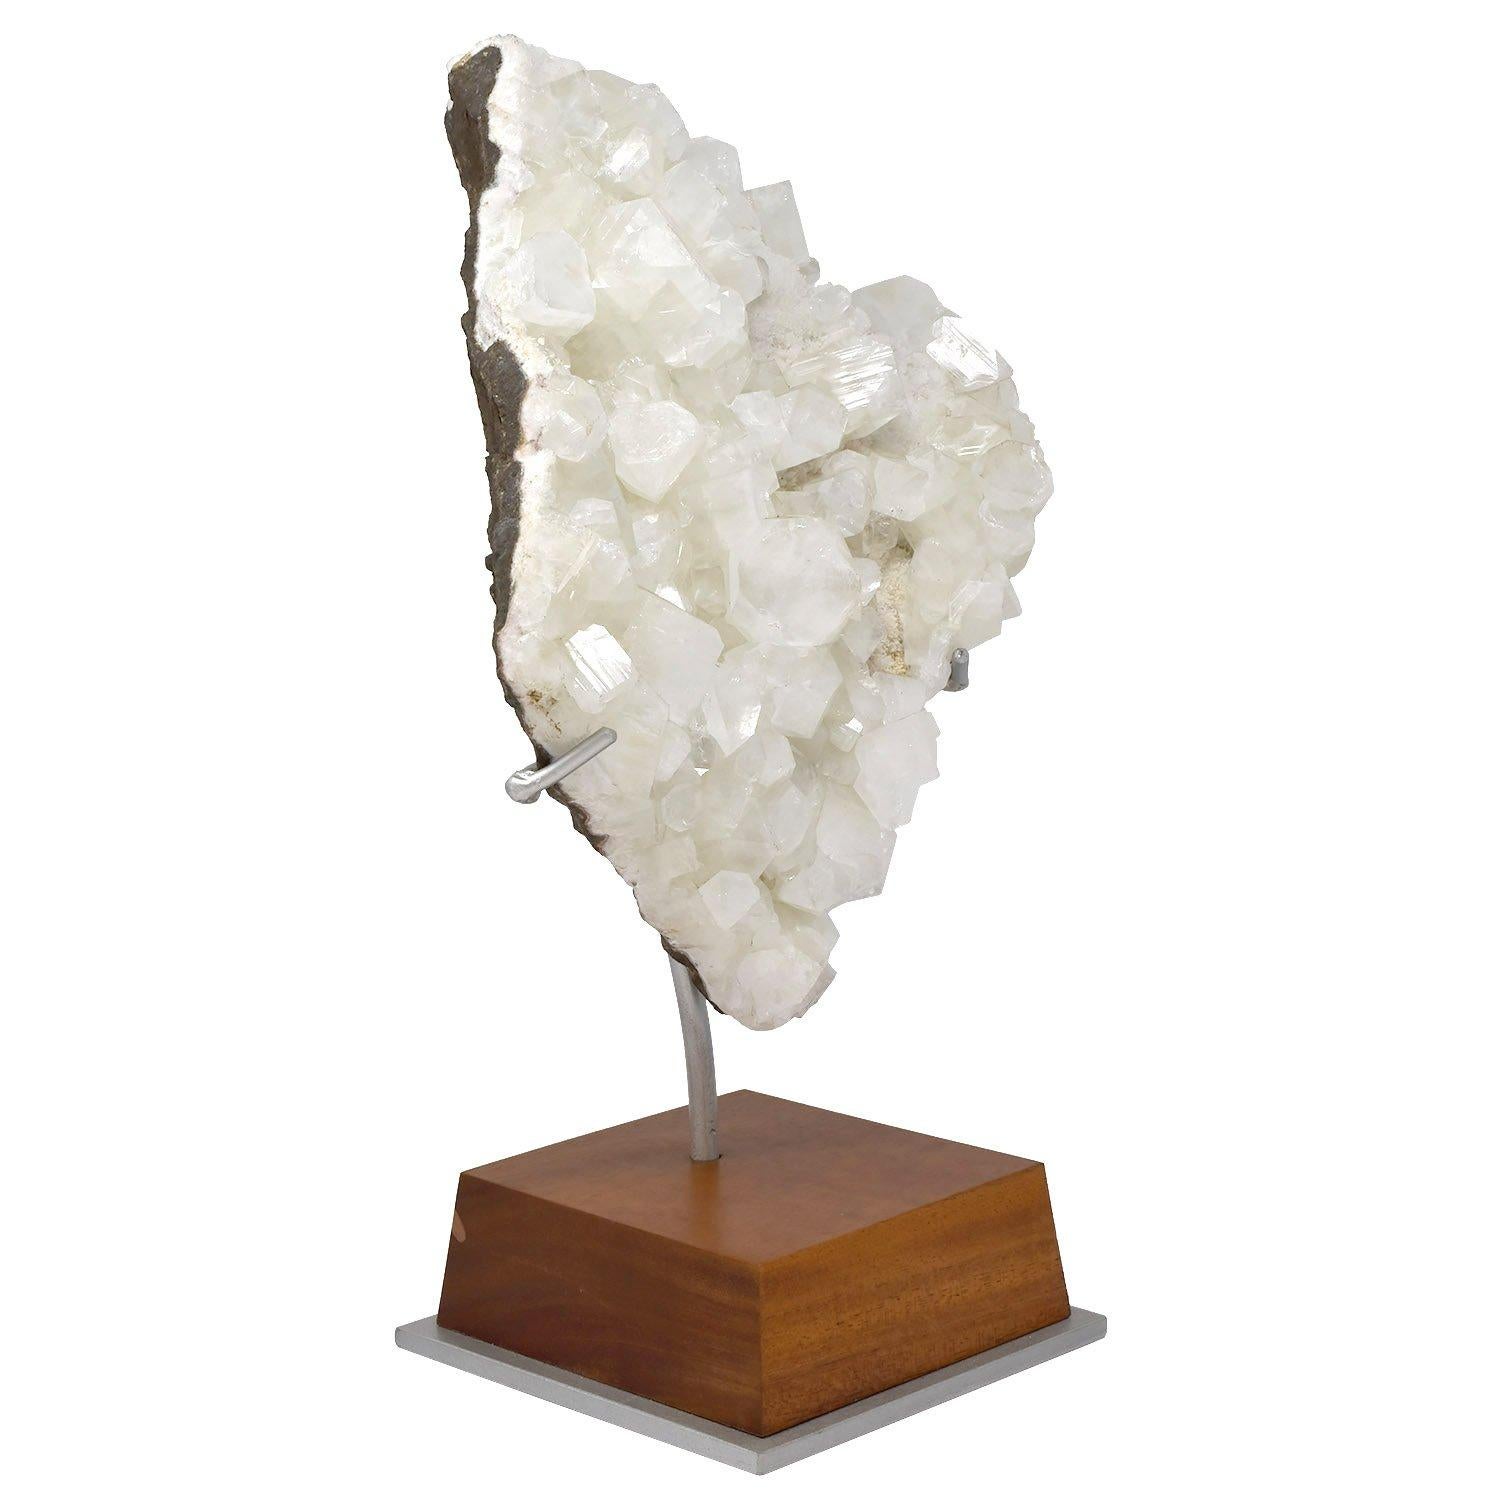 Other Naturally Formed Mineral, Clear Apophyllite Sculpture For Sale